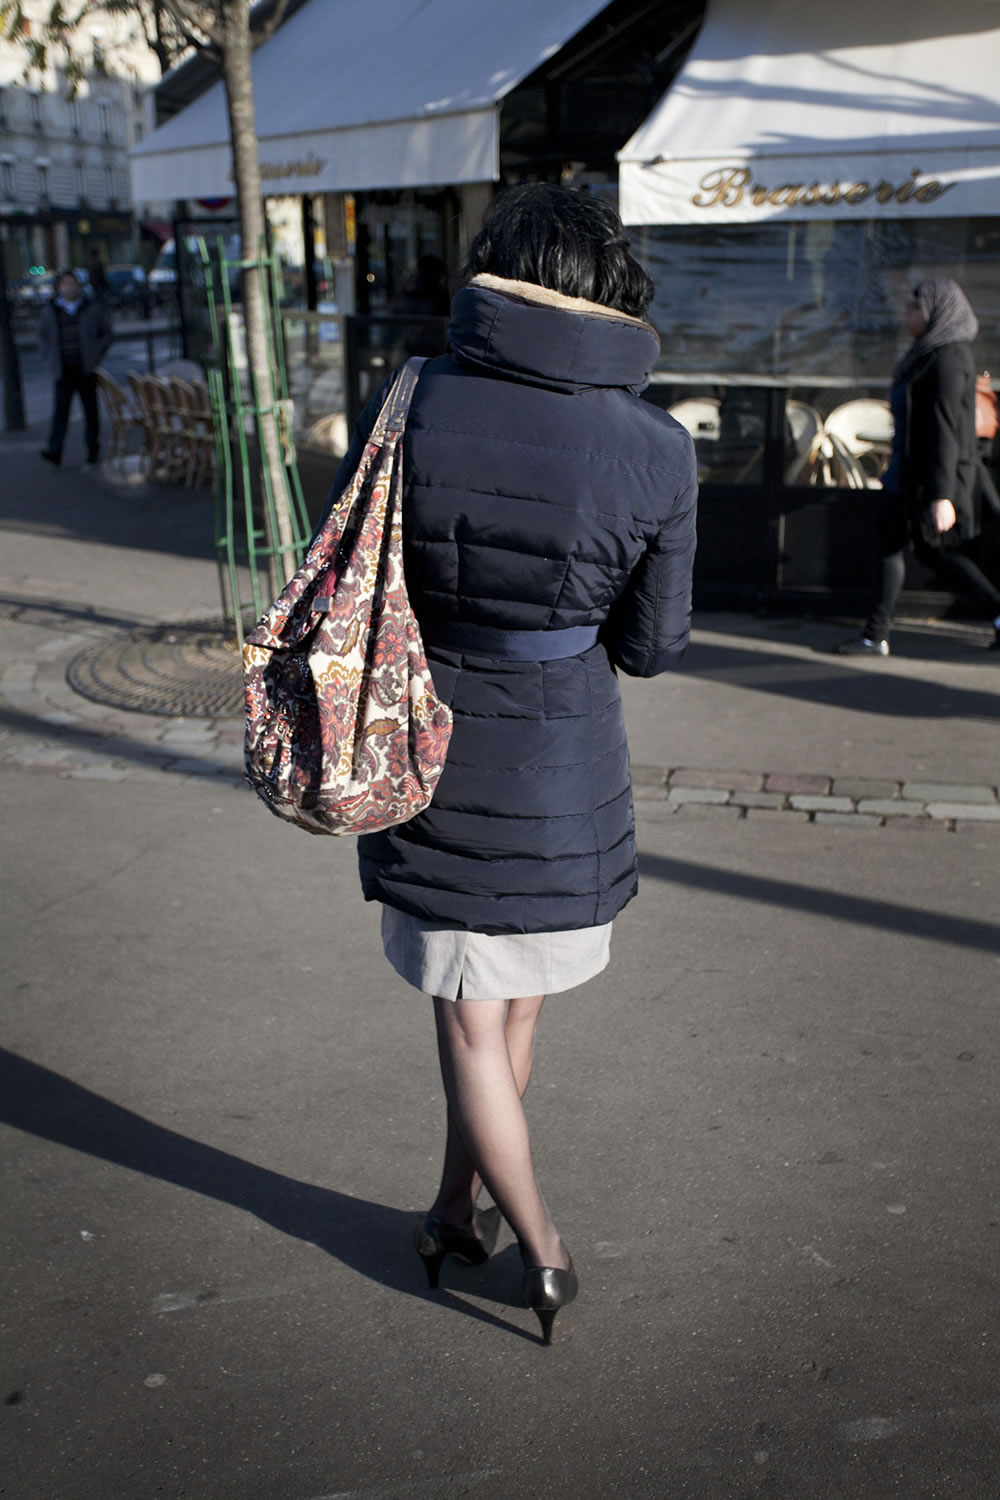 Une Parisienne, texting in front of the corner café, on a crisp autumn afternoon.  